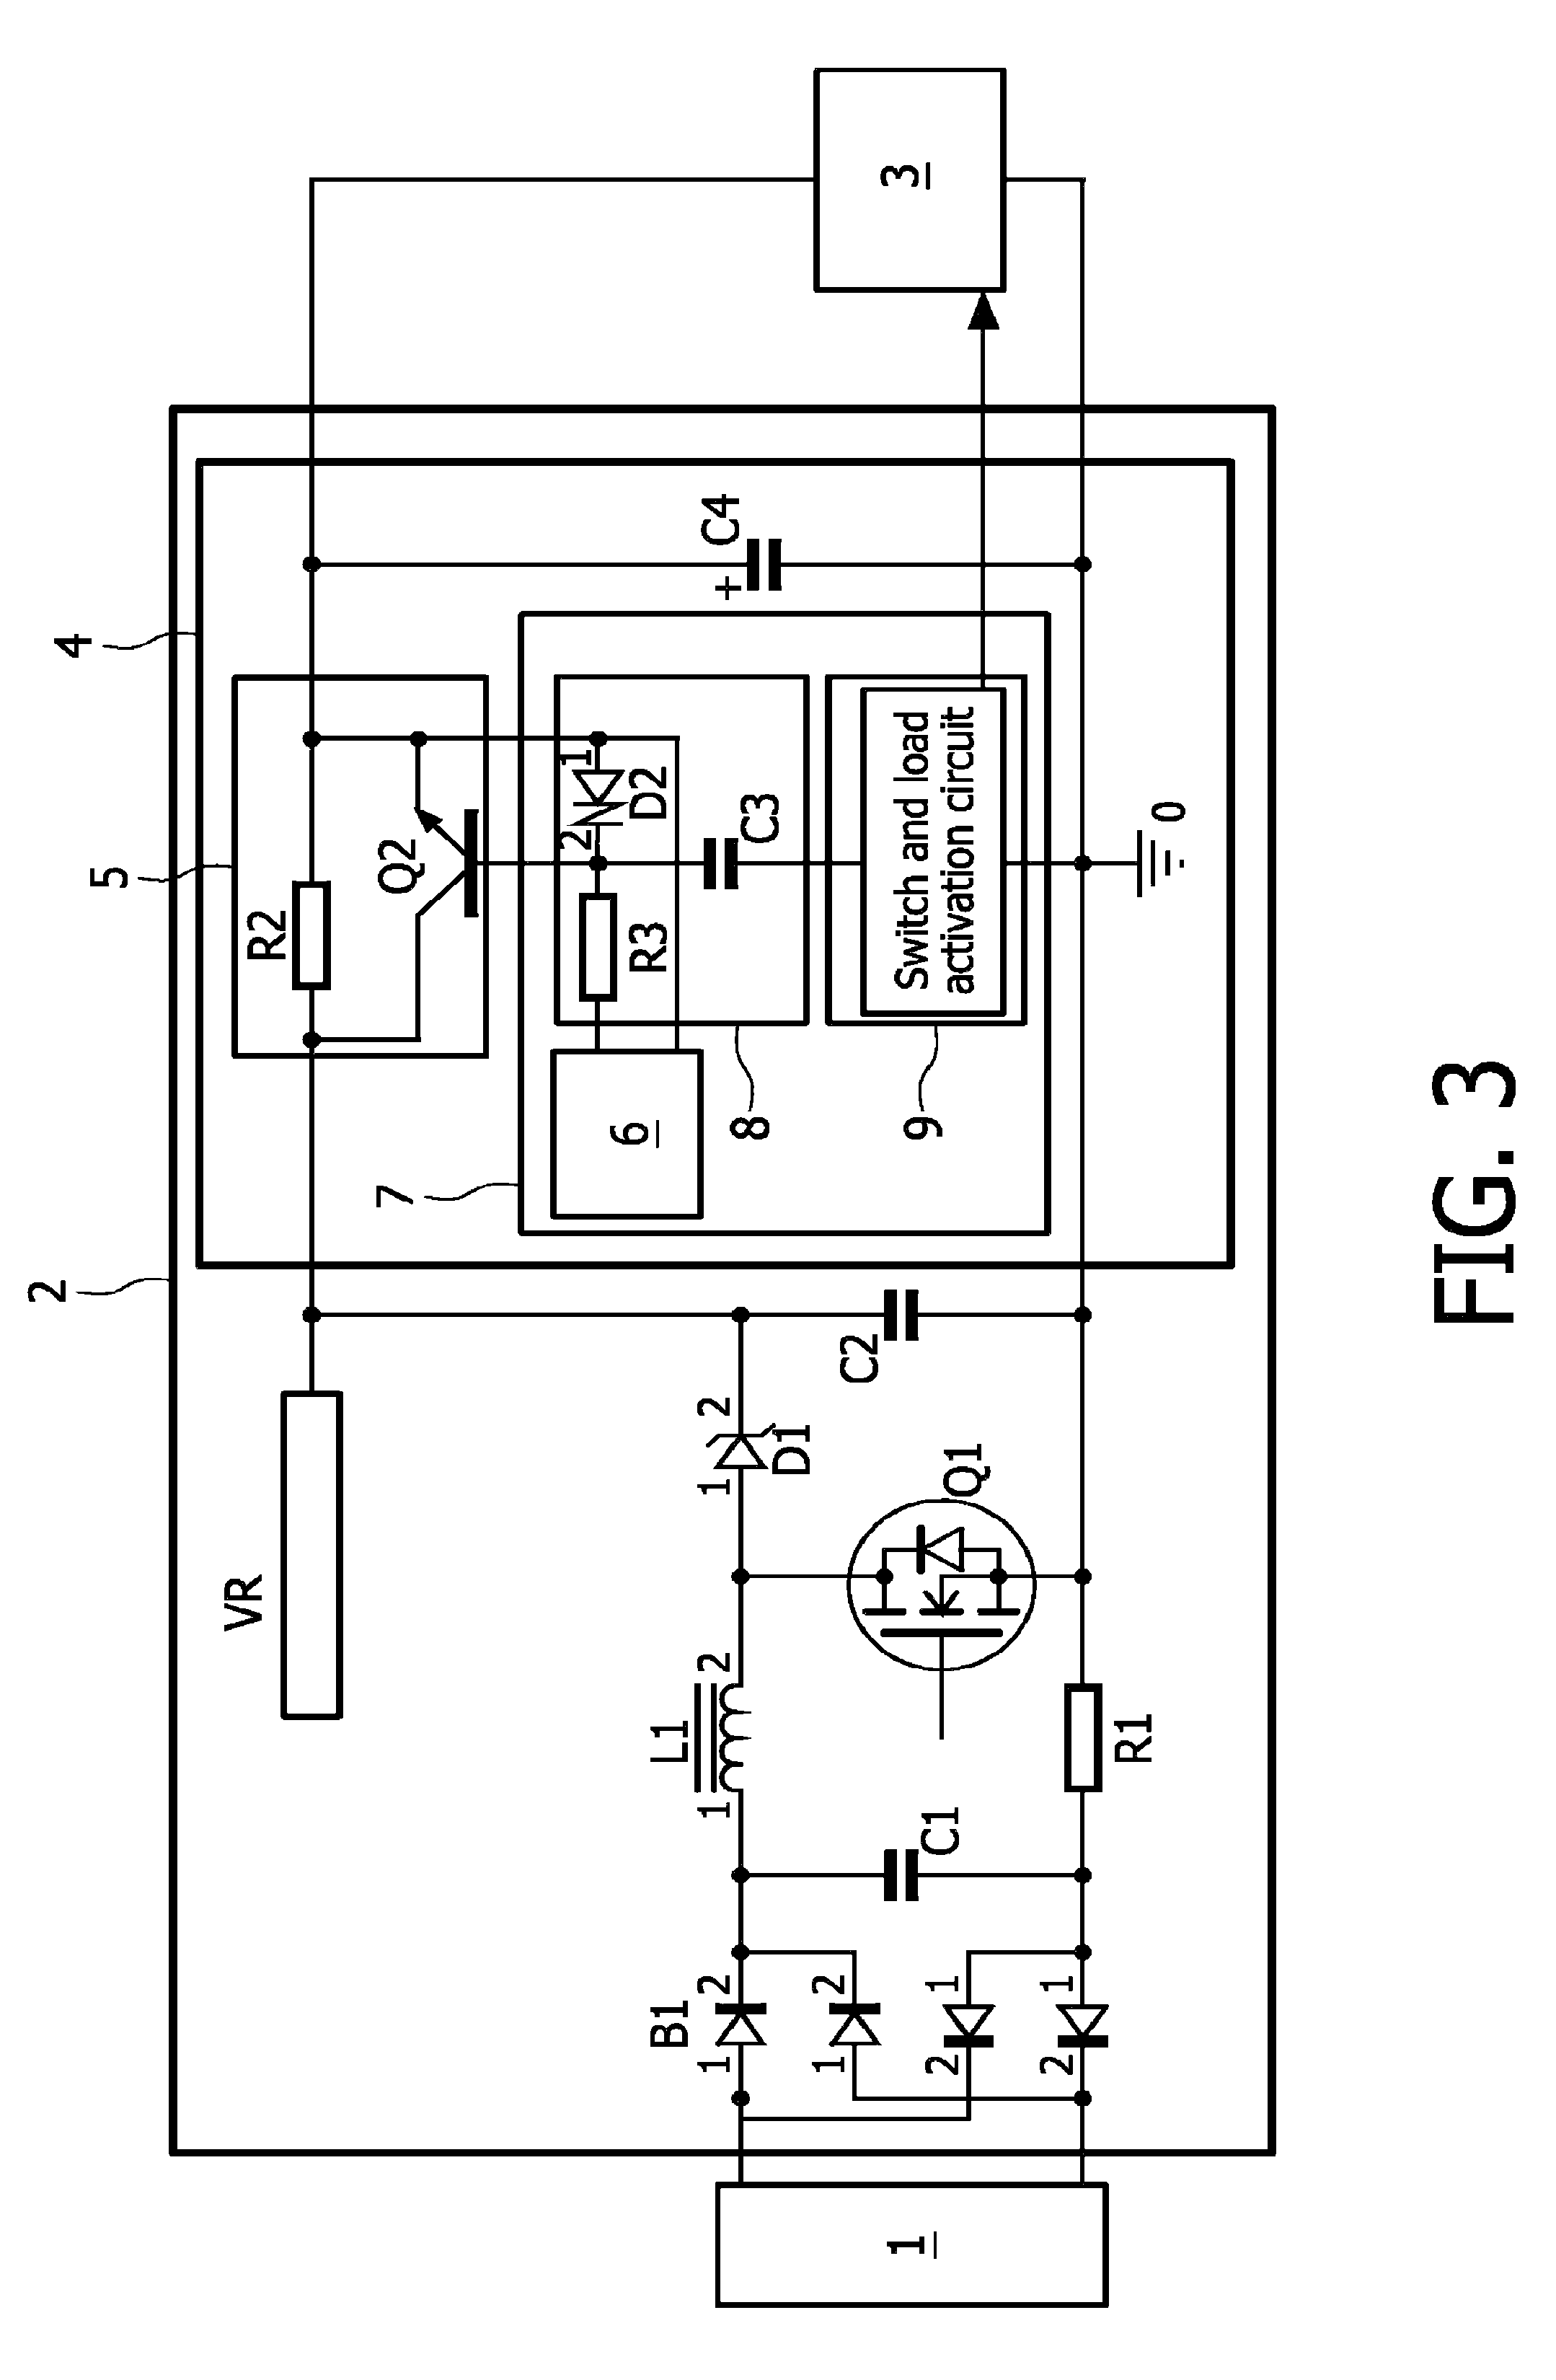 Inrush current limiter device and power factor control (PFC) circuit having an improved inrush current limiter device